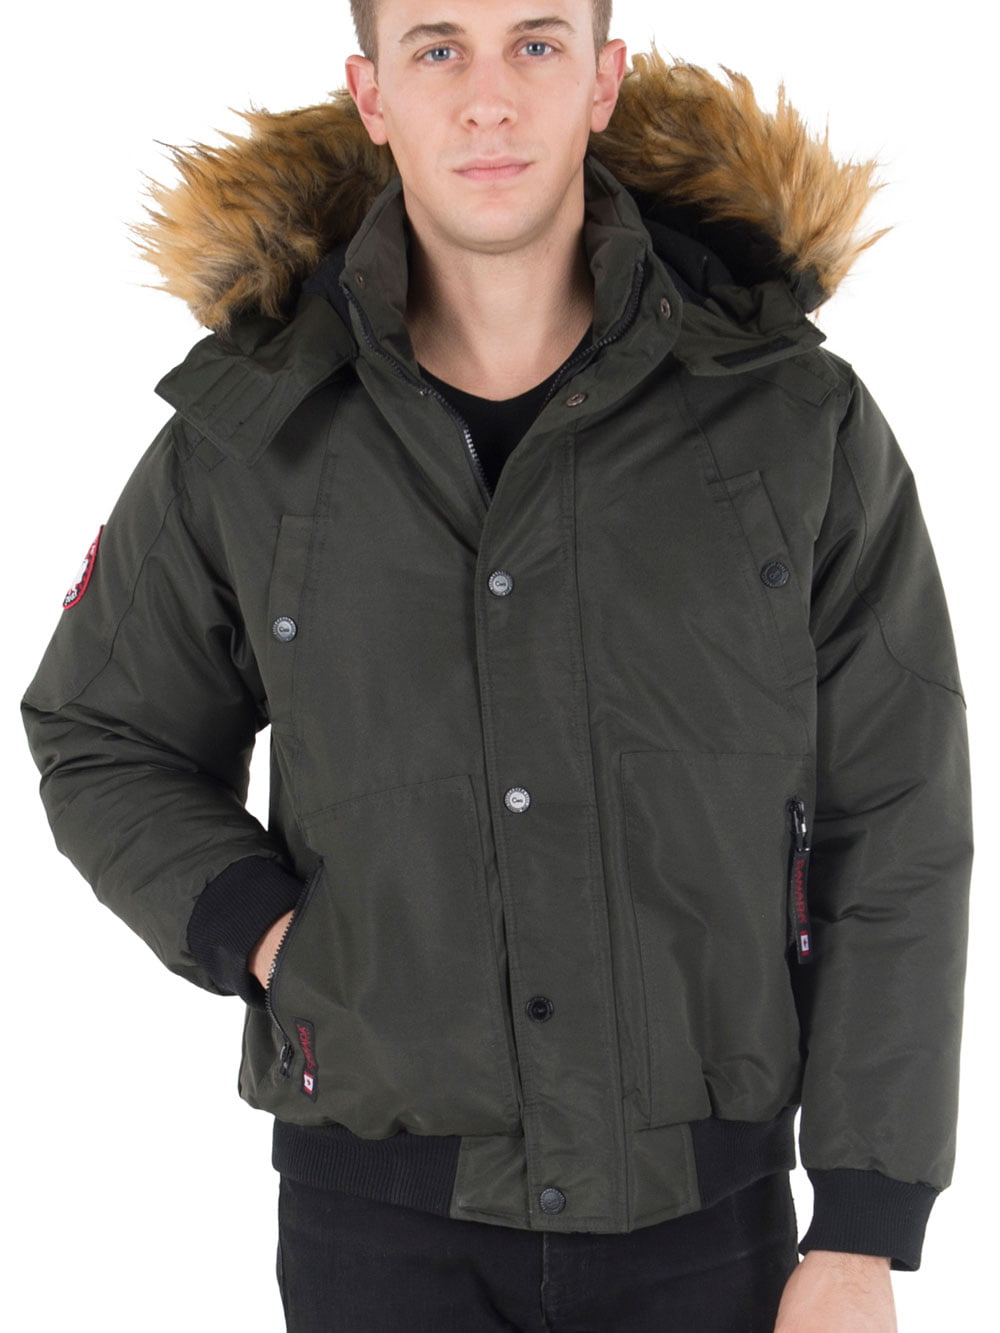 Canada Weather Gear - Canada Weather Gear Men's Insulated Jacket ...